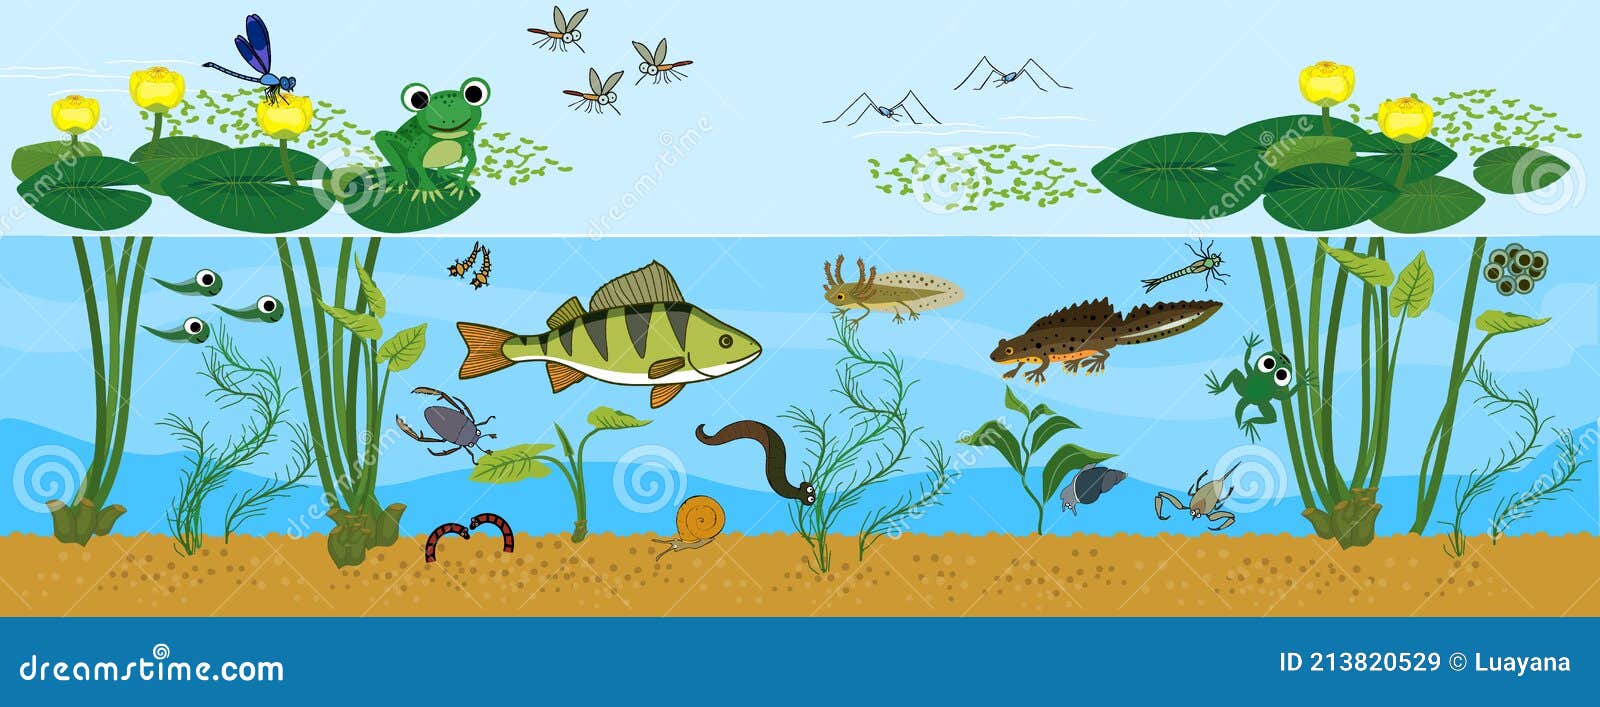 ecosystem of pond. animals living in pond. diverse inhabitants of pond in their natural